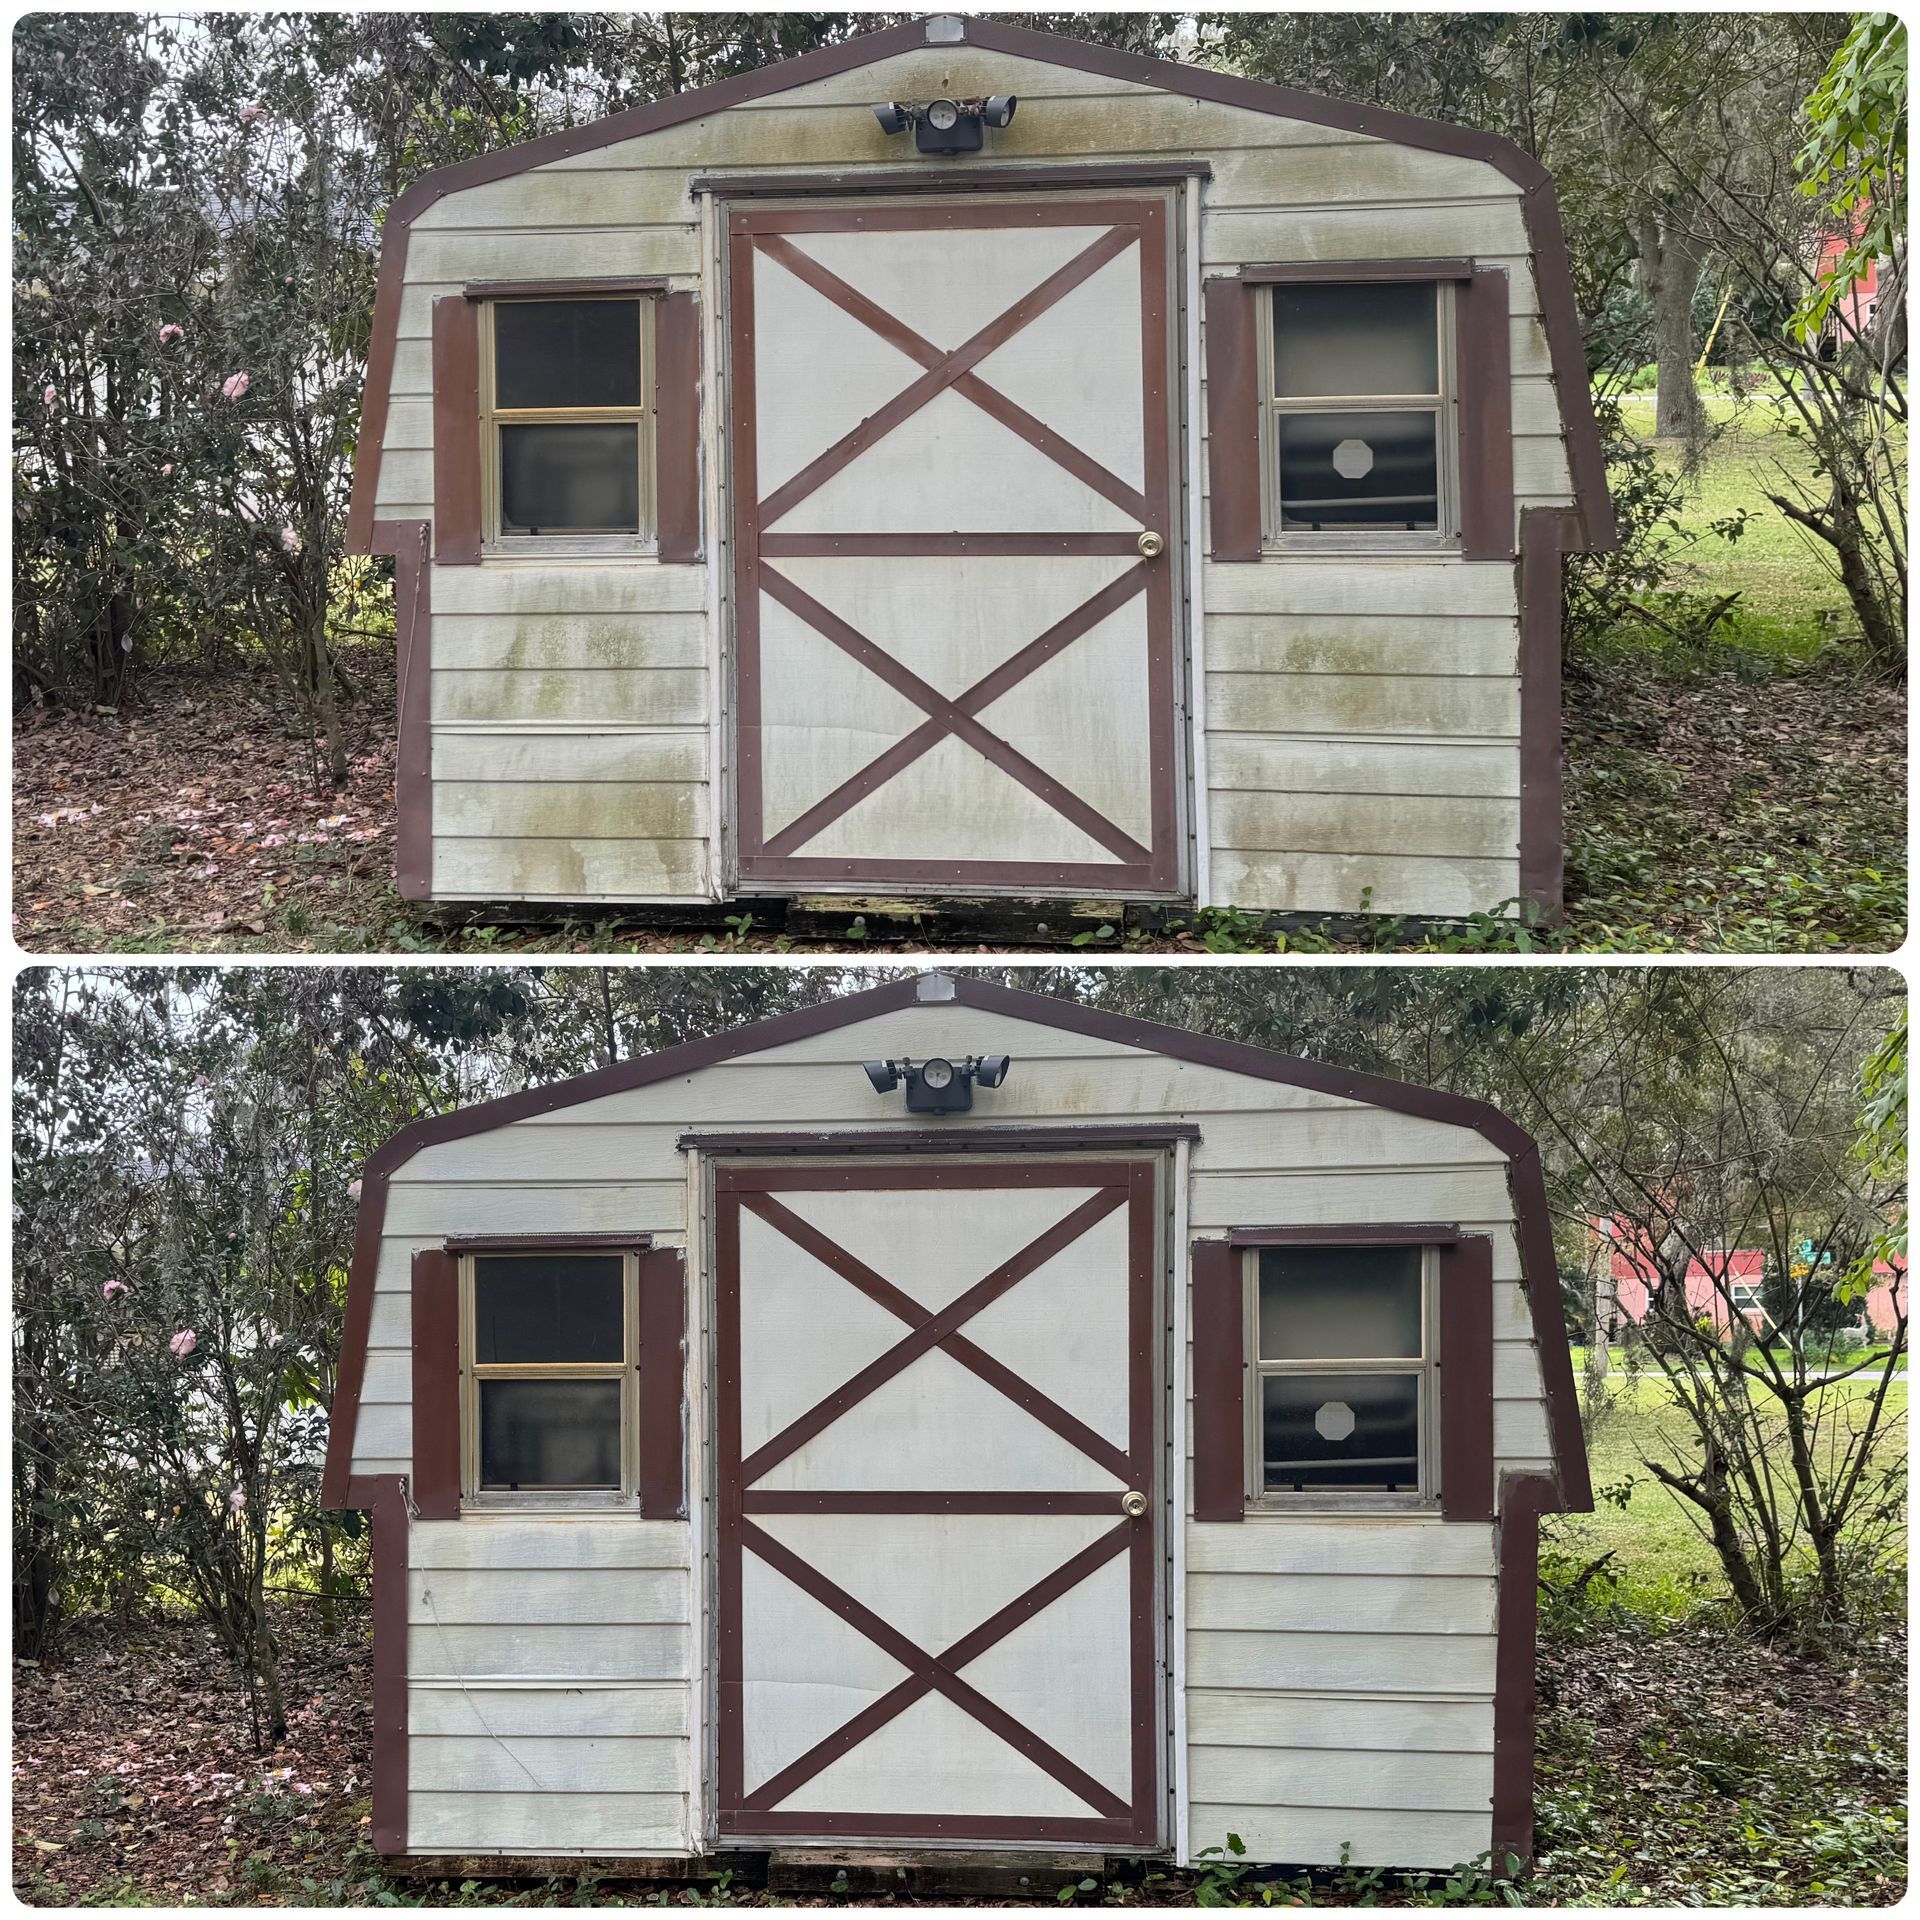 A before and after picture of a barn shed.